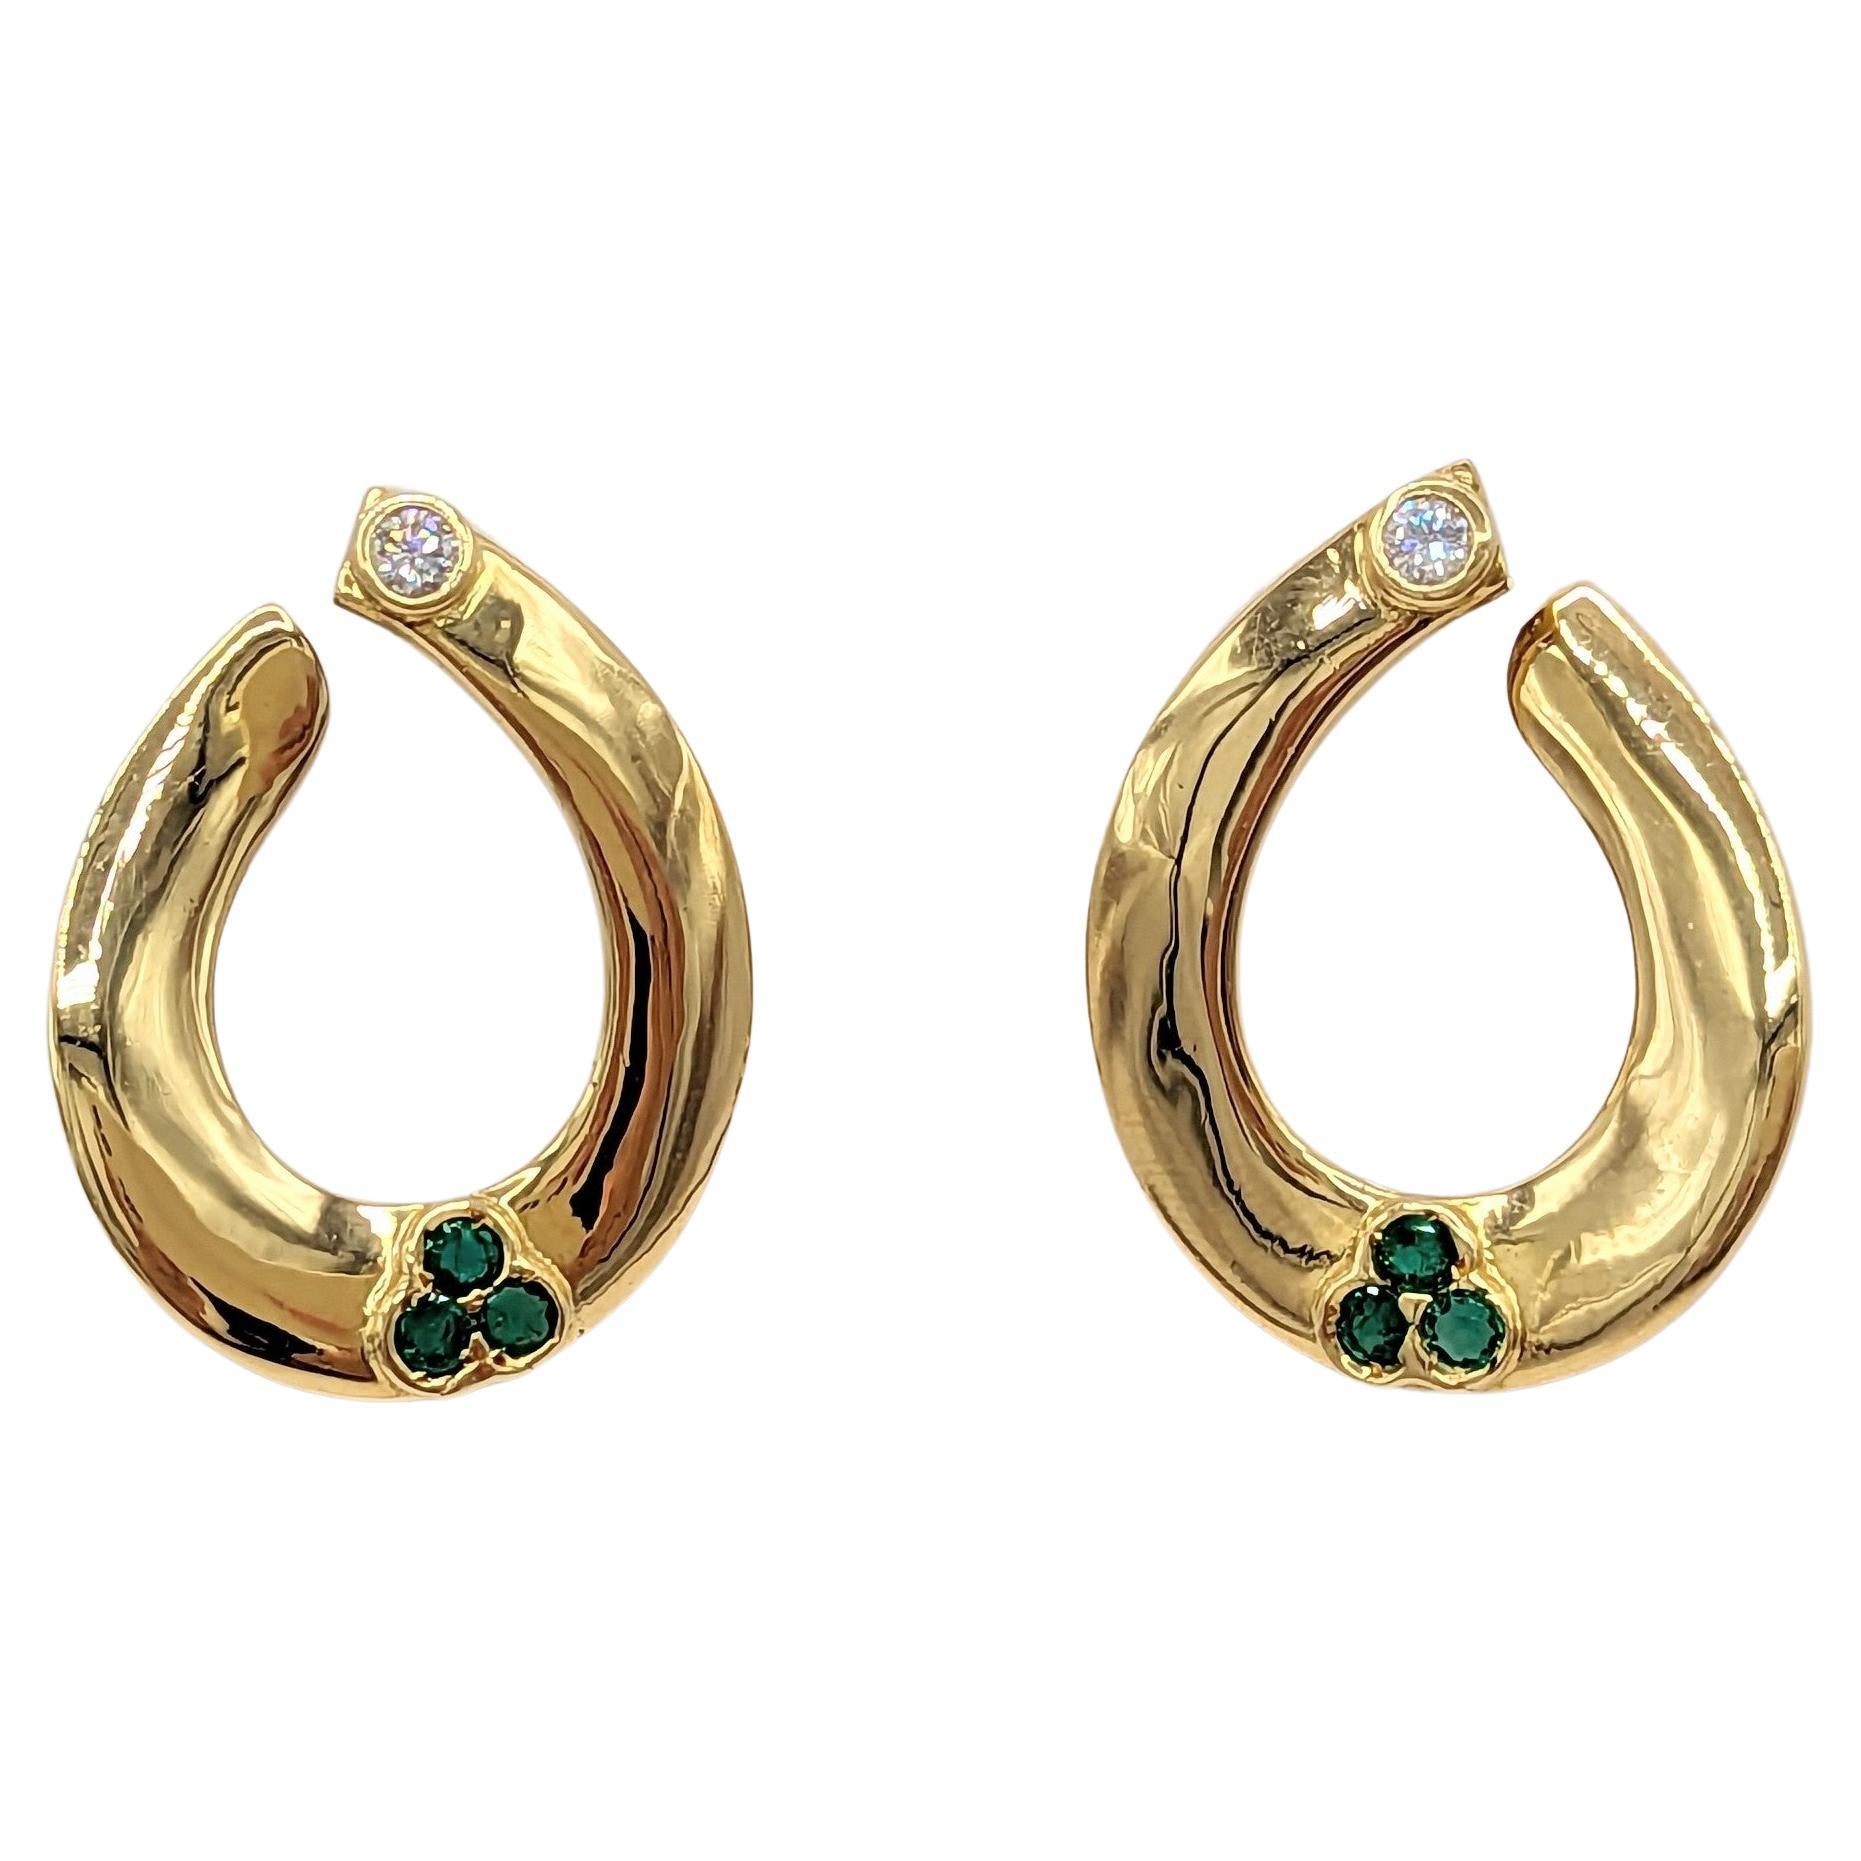 White Diamond and Emerald Hoop Earrings in 18K Yellow Gold